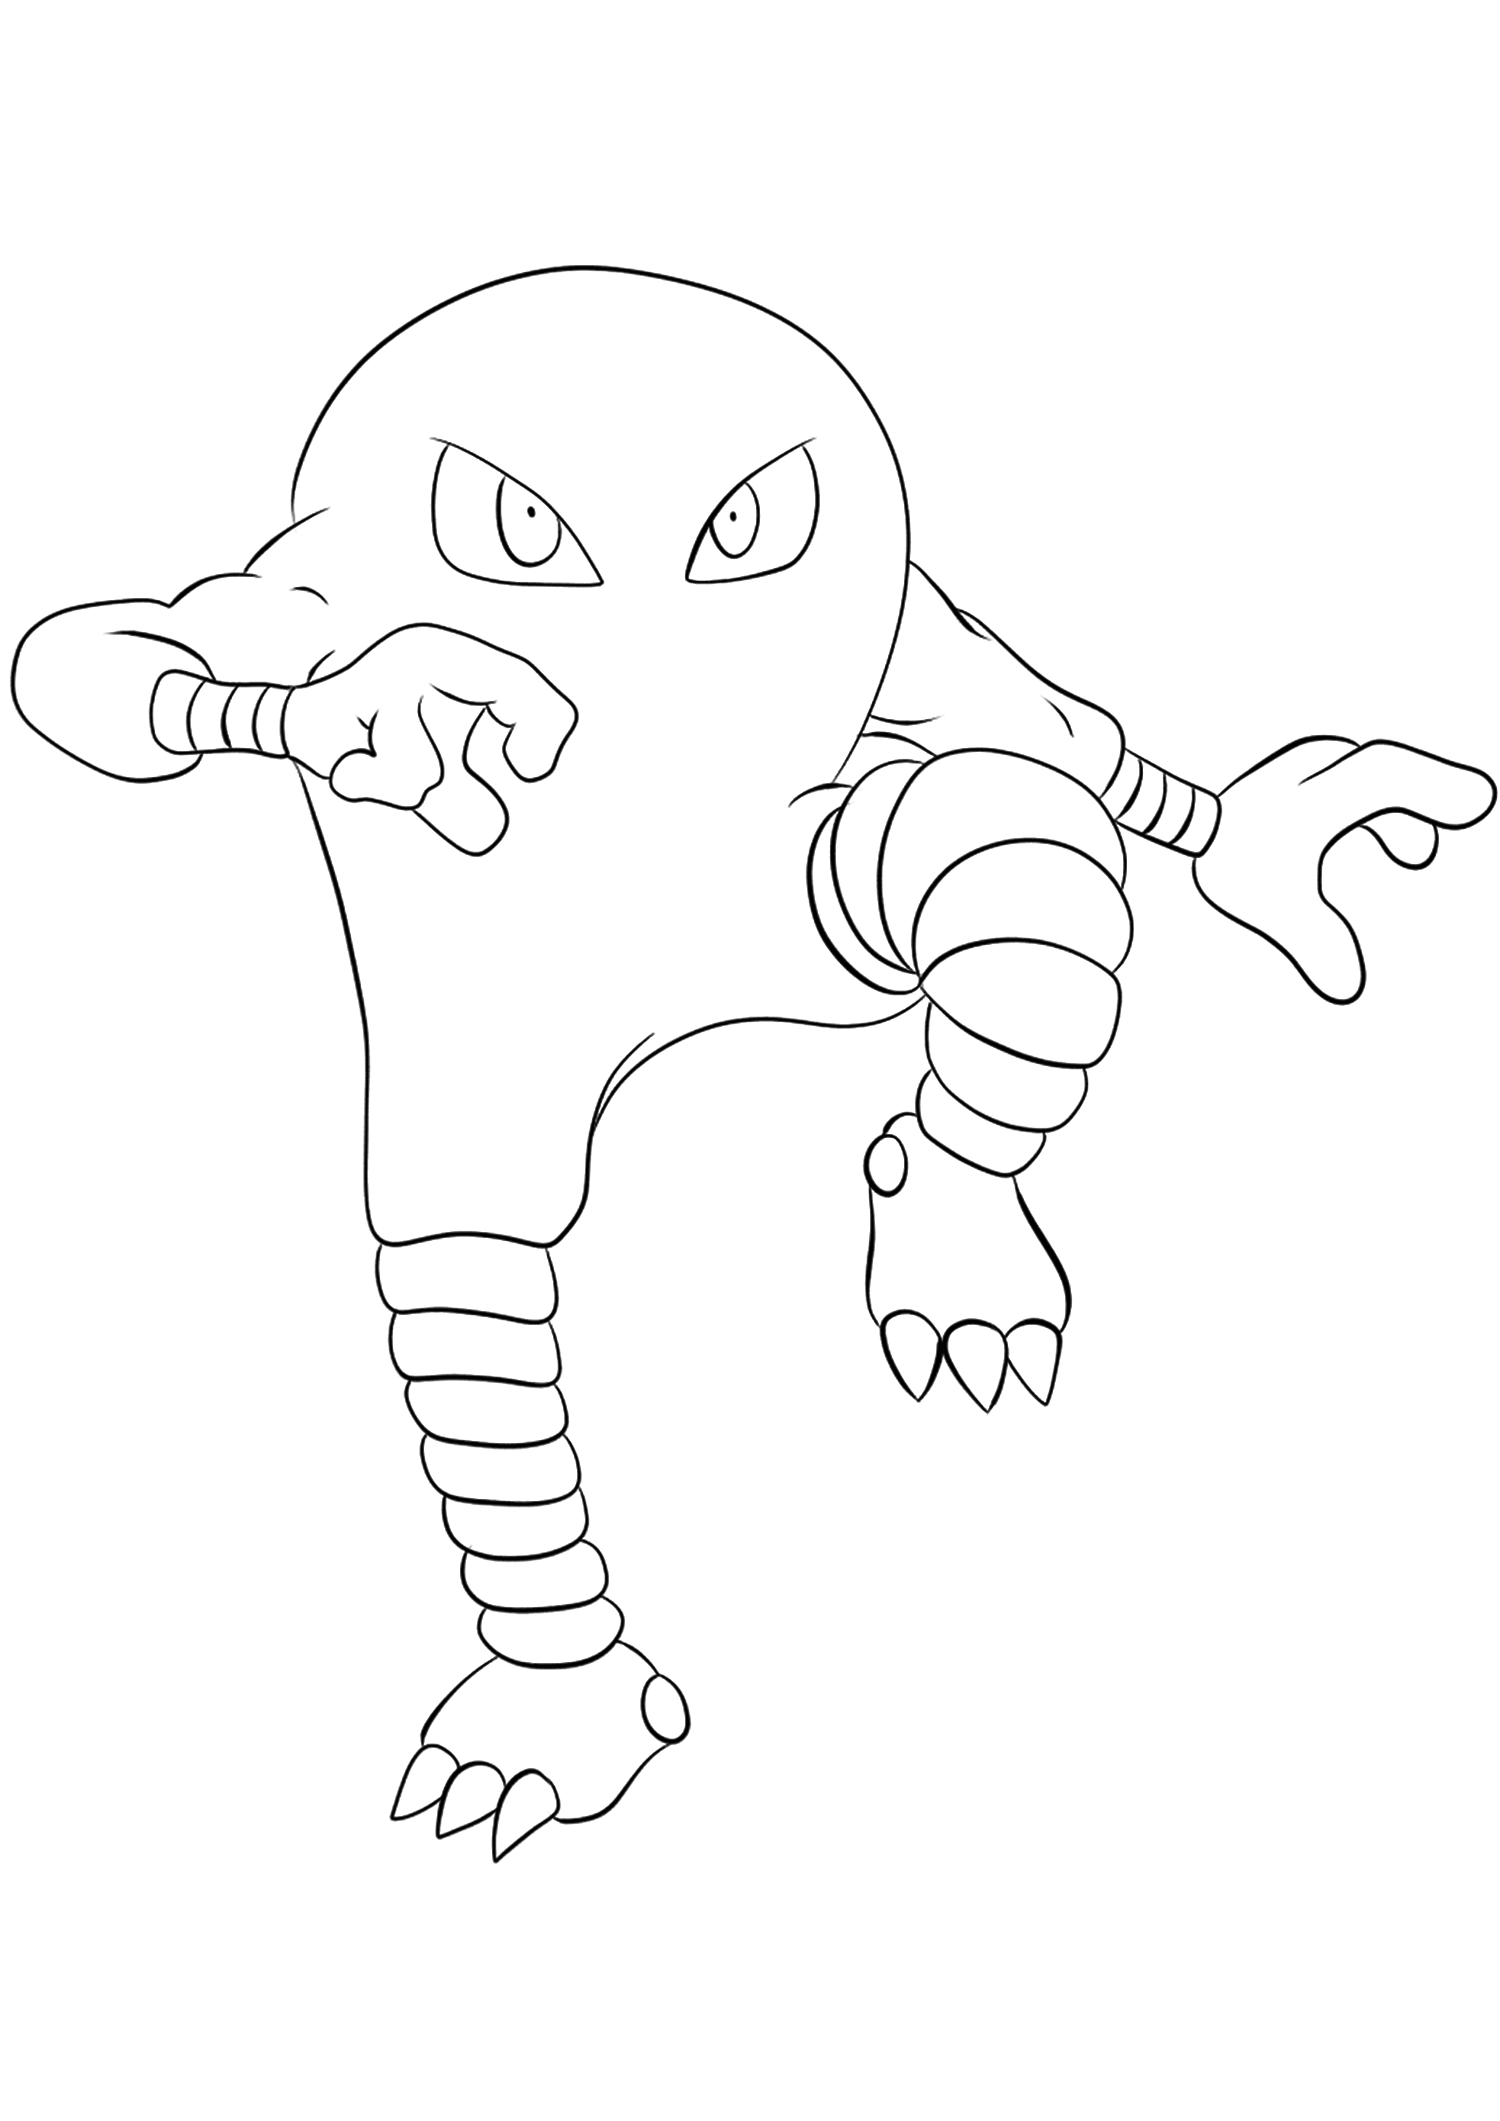 Hitmonlee (No.106). Hitmonlee Coloring page, Generation I Pokemon of type FightingOriginal image credit: Pokemon linearts by Lilly Gerbil on Deviantart.Permission:  All rights reserved © Pokemon company and Ken Sugimori.